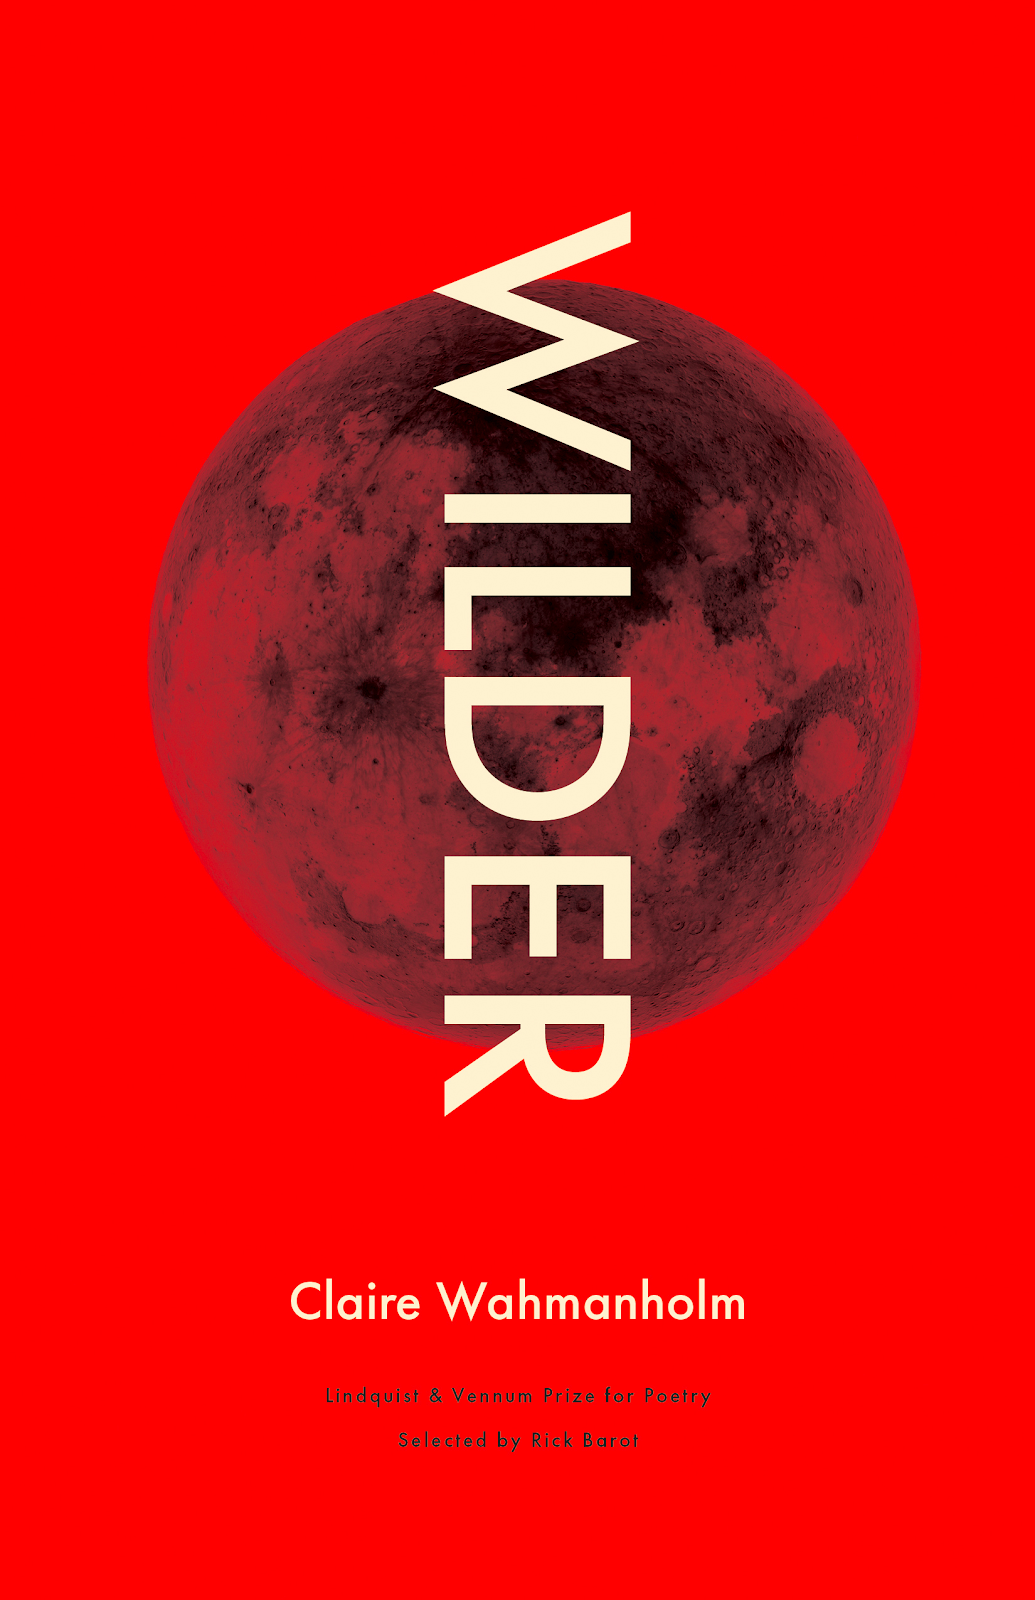 Cover of "Wilder" by Claire Wahmanholm: title oriented vertically over a moon over a red background.